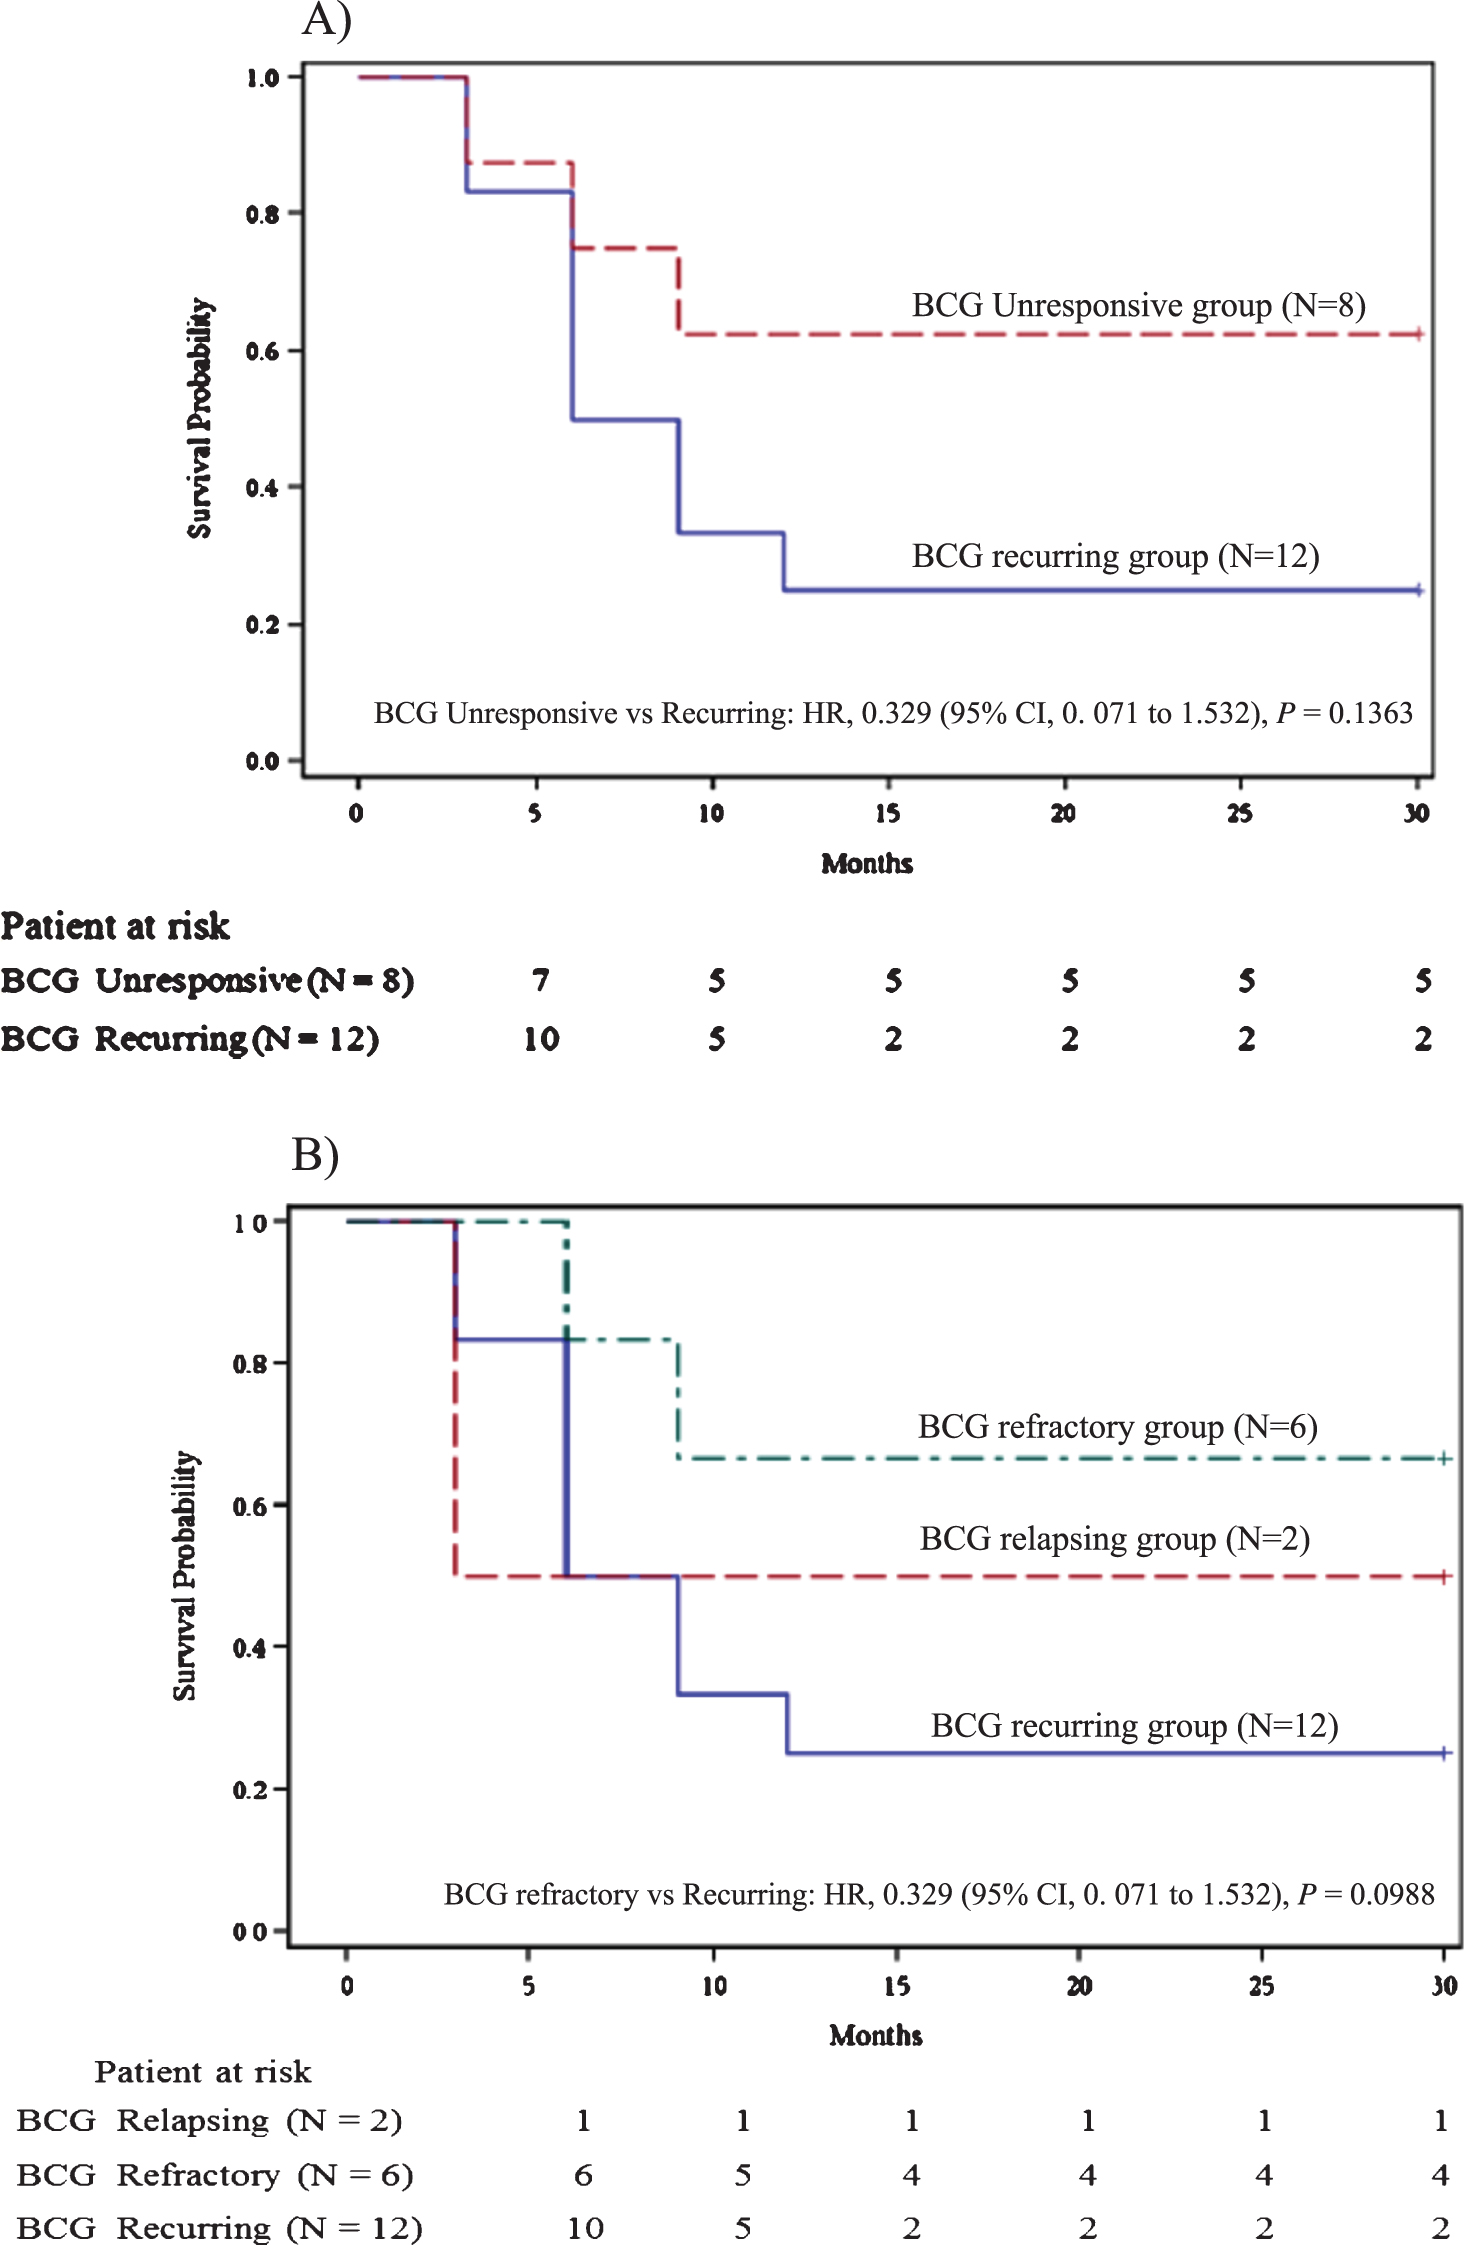 A) Recurrence free survival for BCG unresponsive group vs BCG recurring group. B) Recurrence free survival for BCG relapsing group vs BCG refractory group vs BCG recurring group.